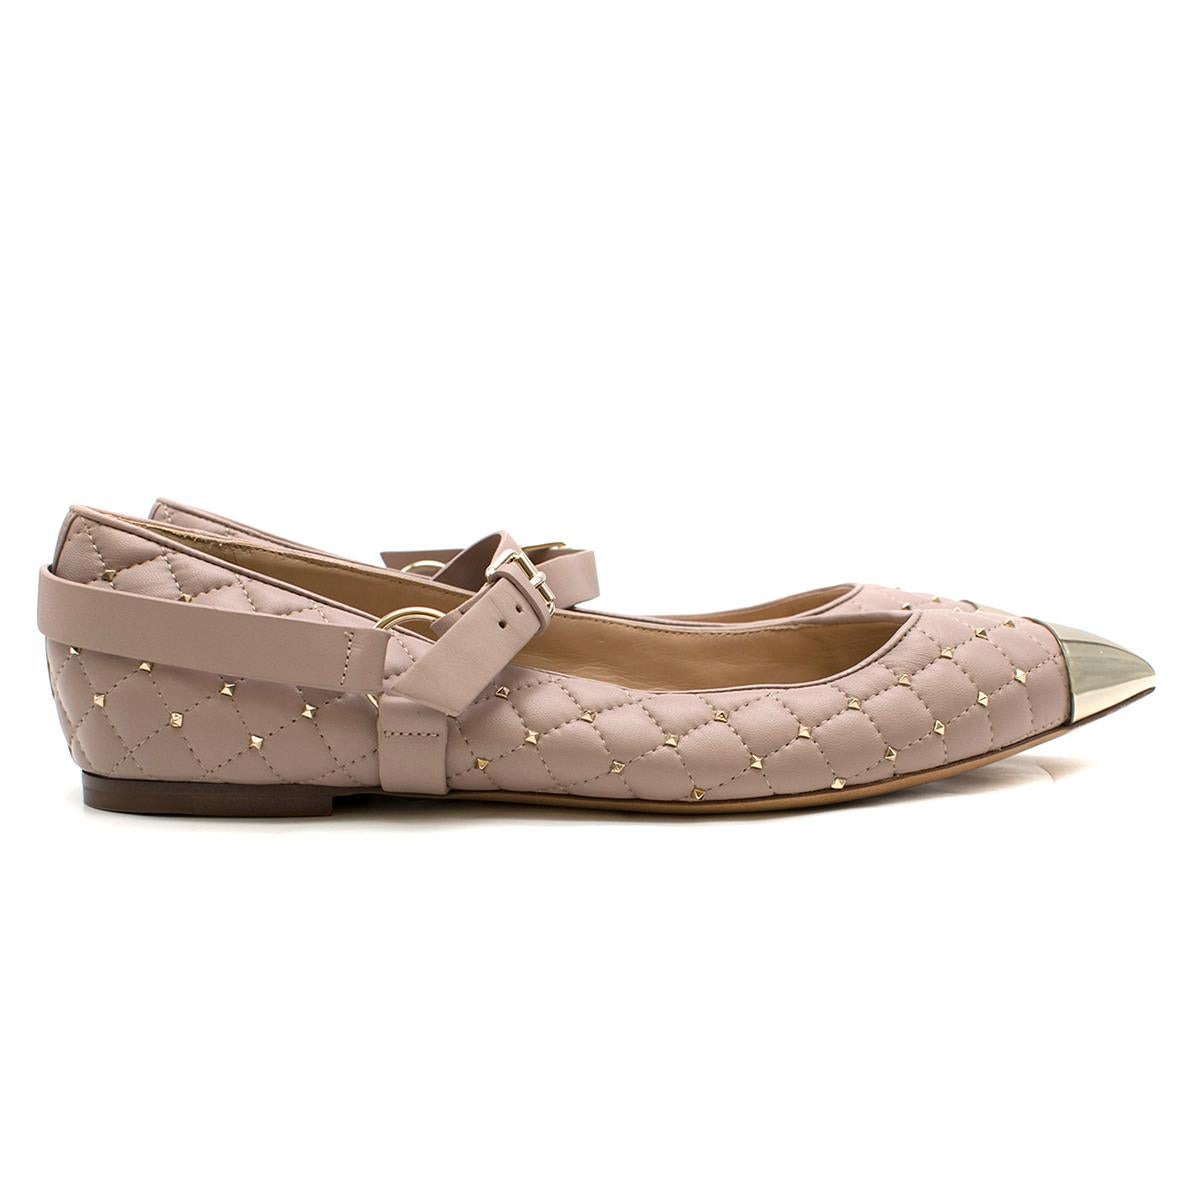 Valentino Poudre Quilted Calfskin Rockstud Ballerina Flats

-Poudre pink, calfskin leather
-Gold toned hardware
-Point toe
-Double ankle strap closure 
-Nude leather insole 

Please note, these items are pre-owned and may show some signs of storage,